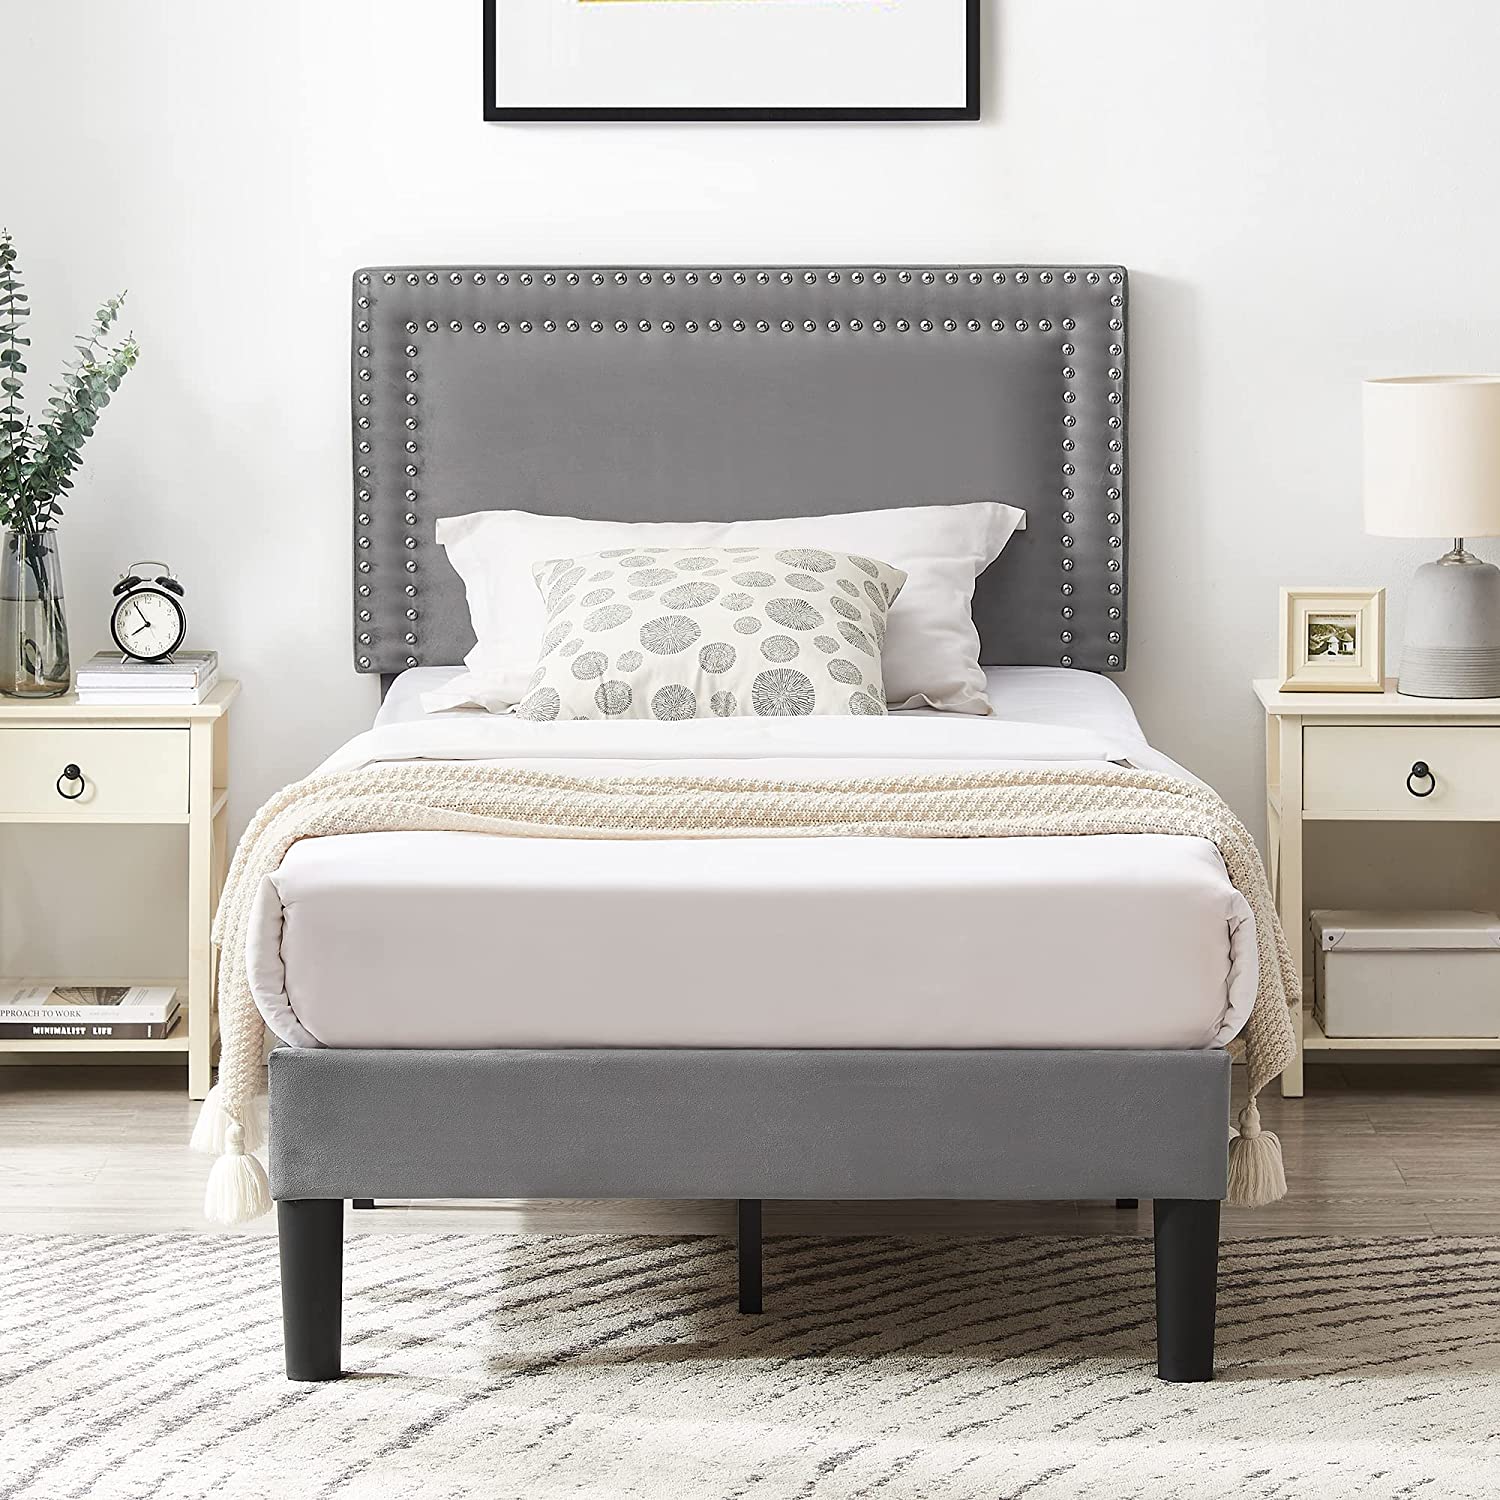 Vecelo Modern Platform Bed Frame/Mattress Foundation with Height Adjustable Upholstered Headboard Twin/Full/Queen Grey